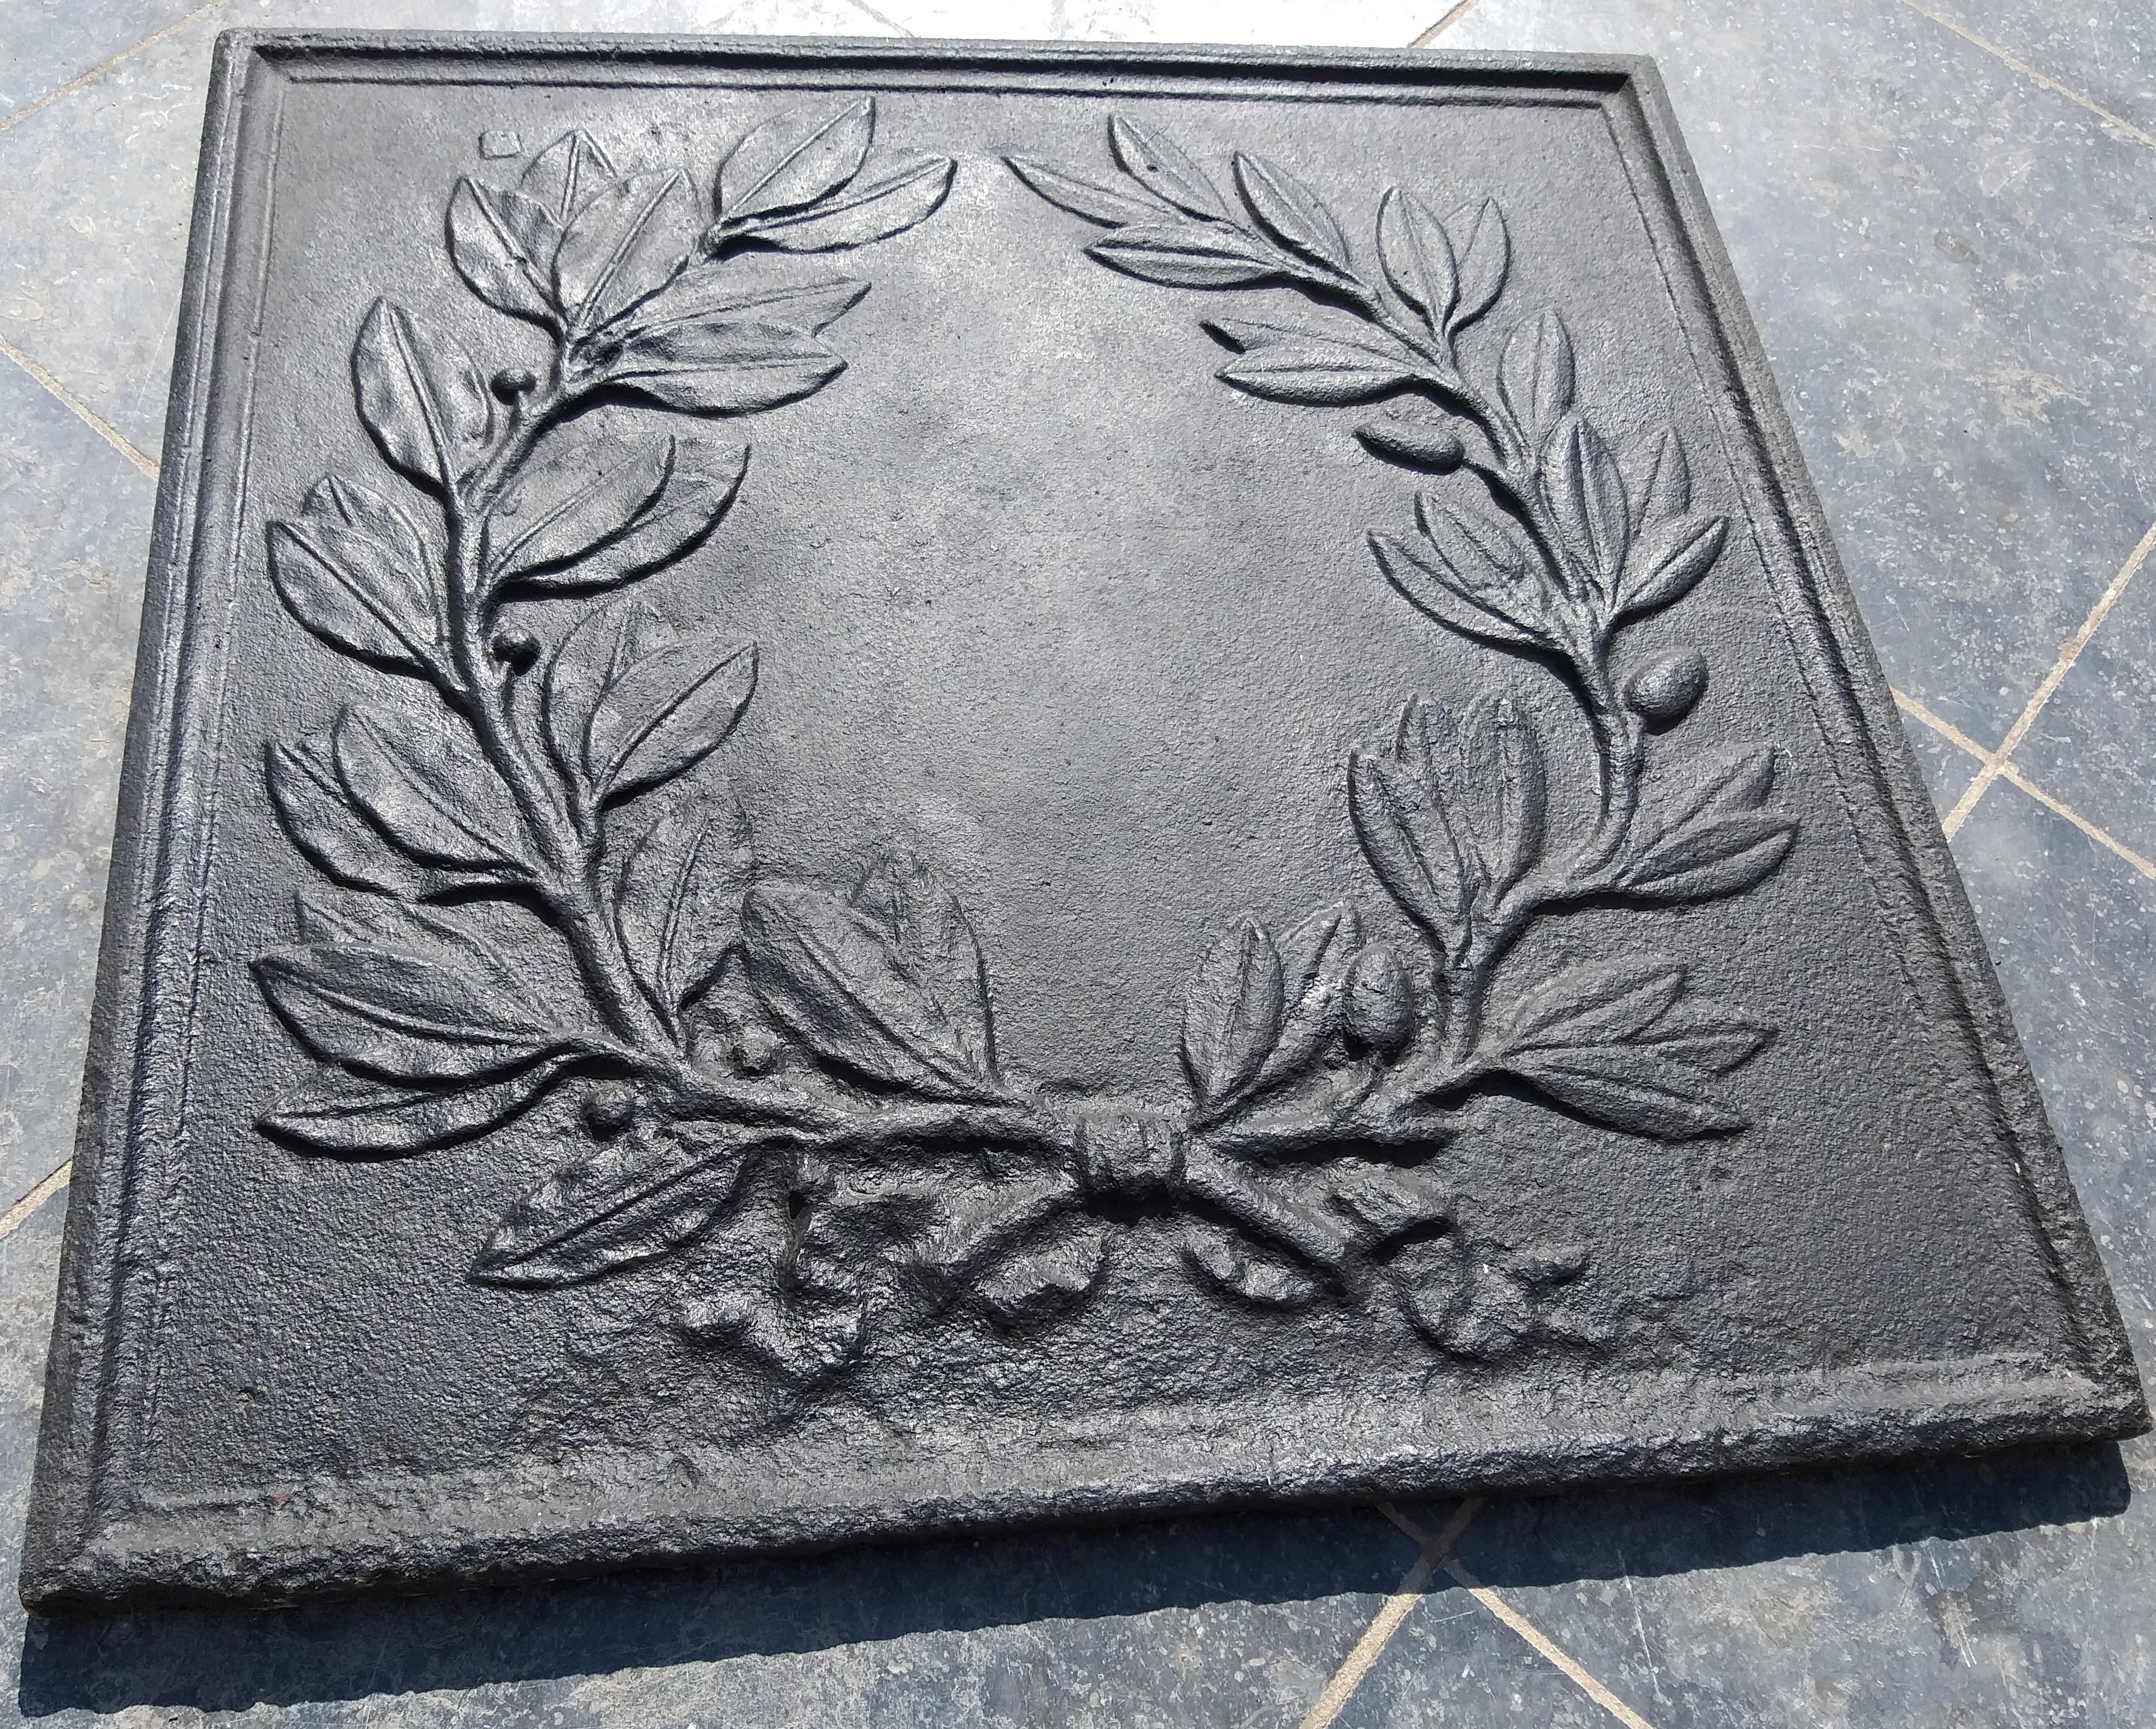 An medium-sized Empire II (ànd Louis XVI-style) fireback from the early 1800s, maybe earlier. Apart from some firewear, this quality casting has stood the ravages of time very well. The symbol of the Laurel: Victory. Crowning a successful commander